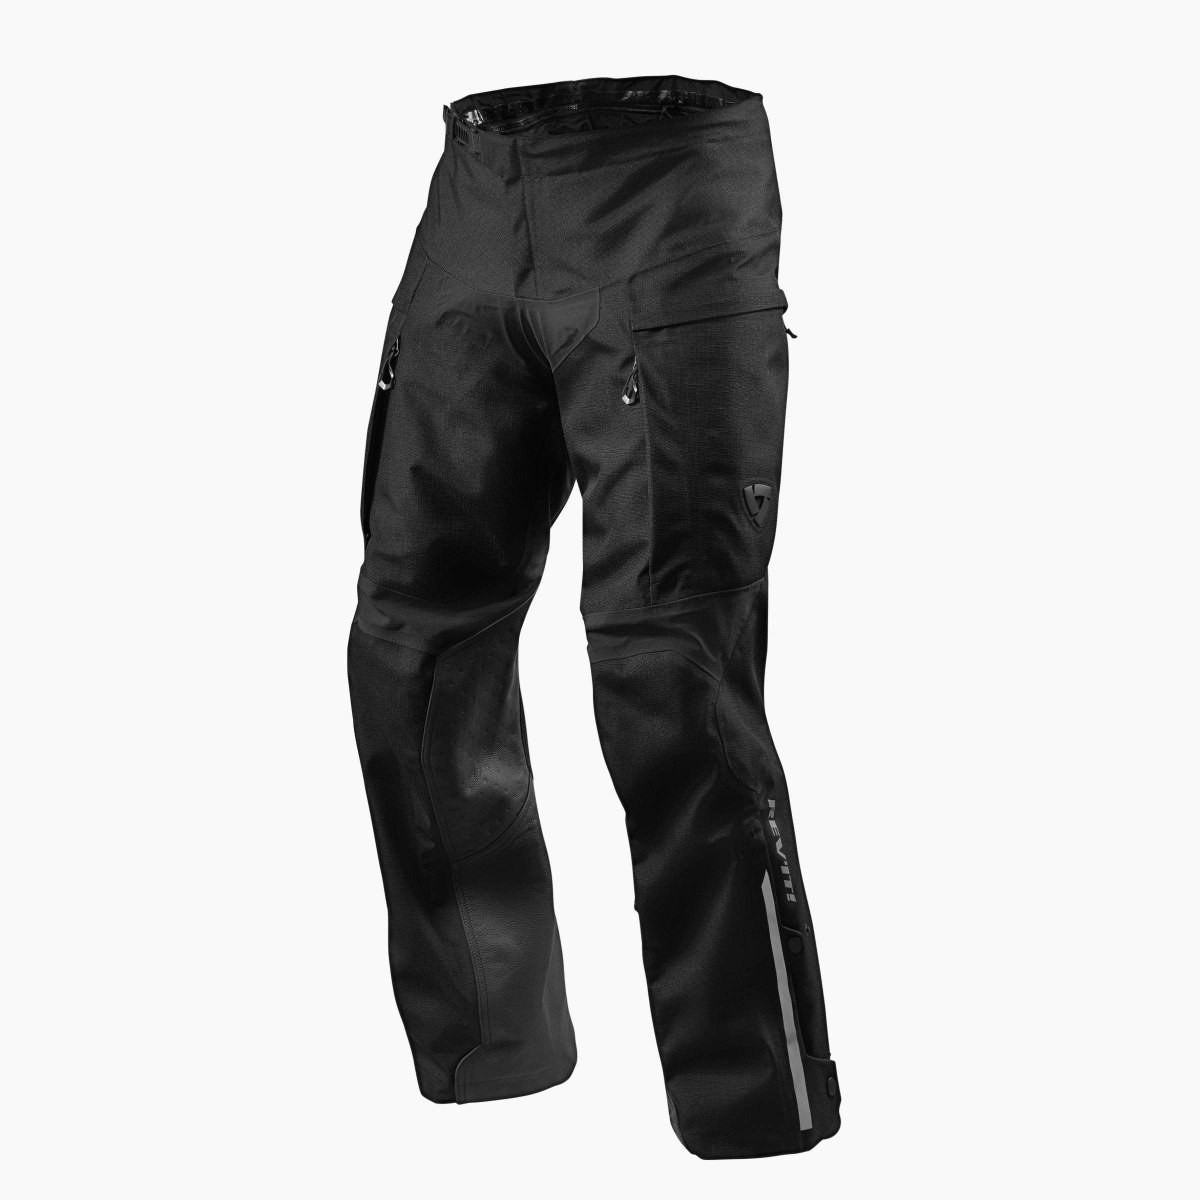 Image of REV'IT! Component H2O Standard Black Motorcycle Pants Size L ID 8700001317665